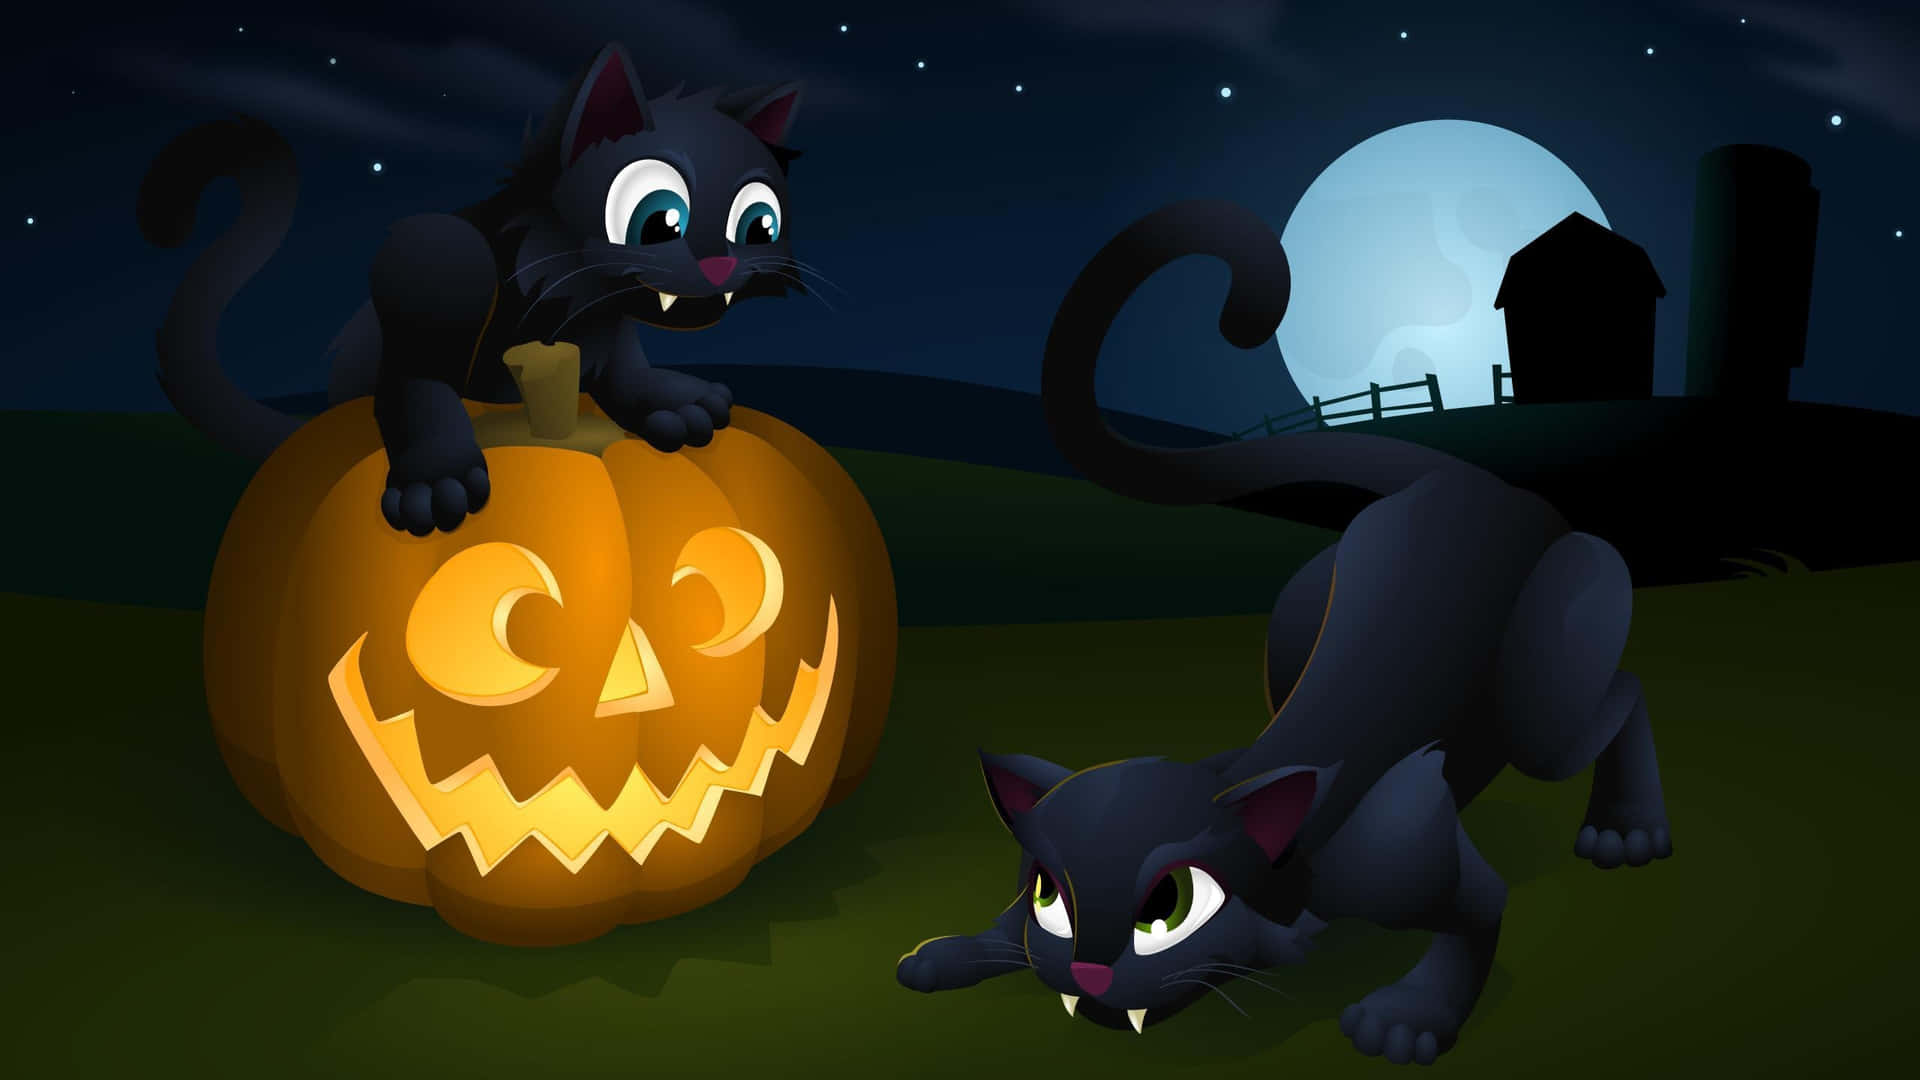 Get Your Purr-fect Halloween Costume with This Fabulous Feline Wallpaper